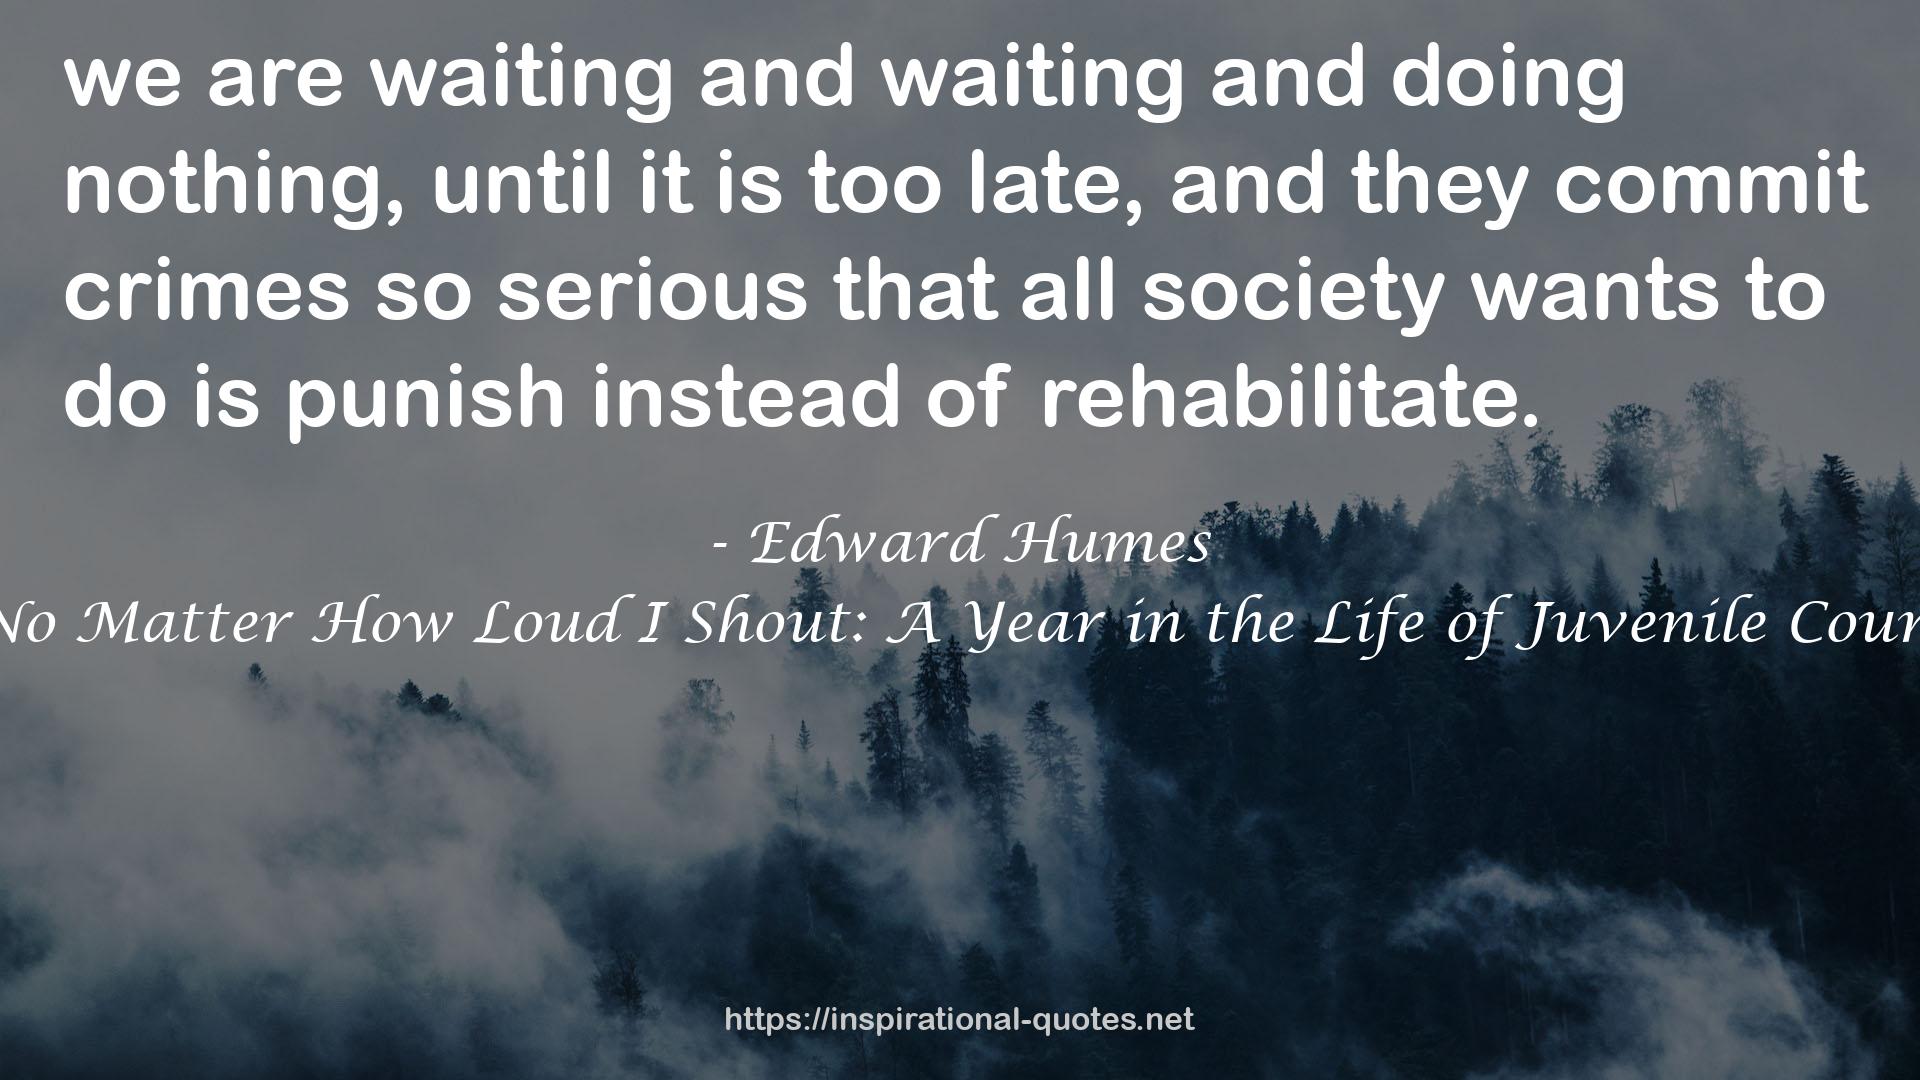 Edward Humes QUOTES